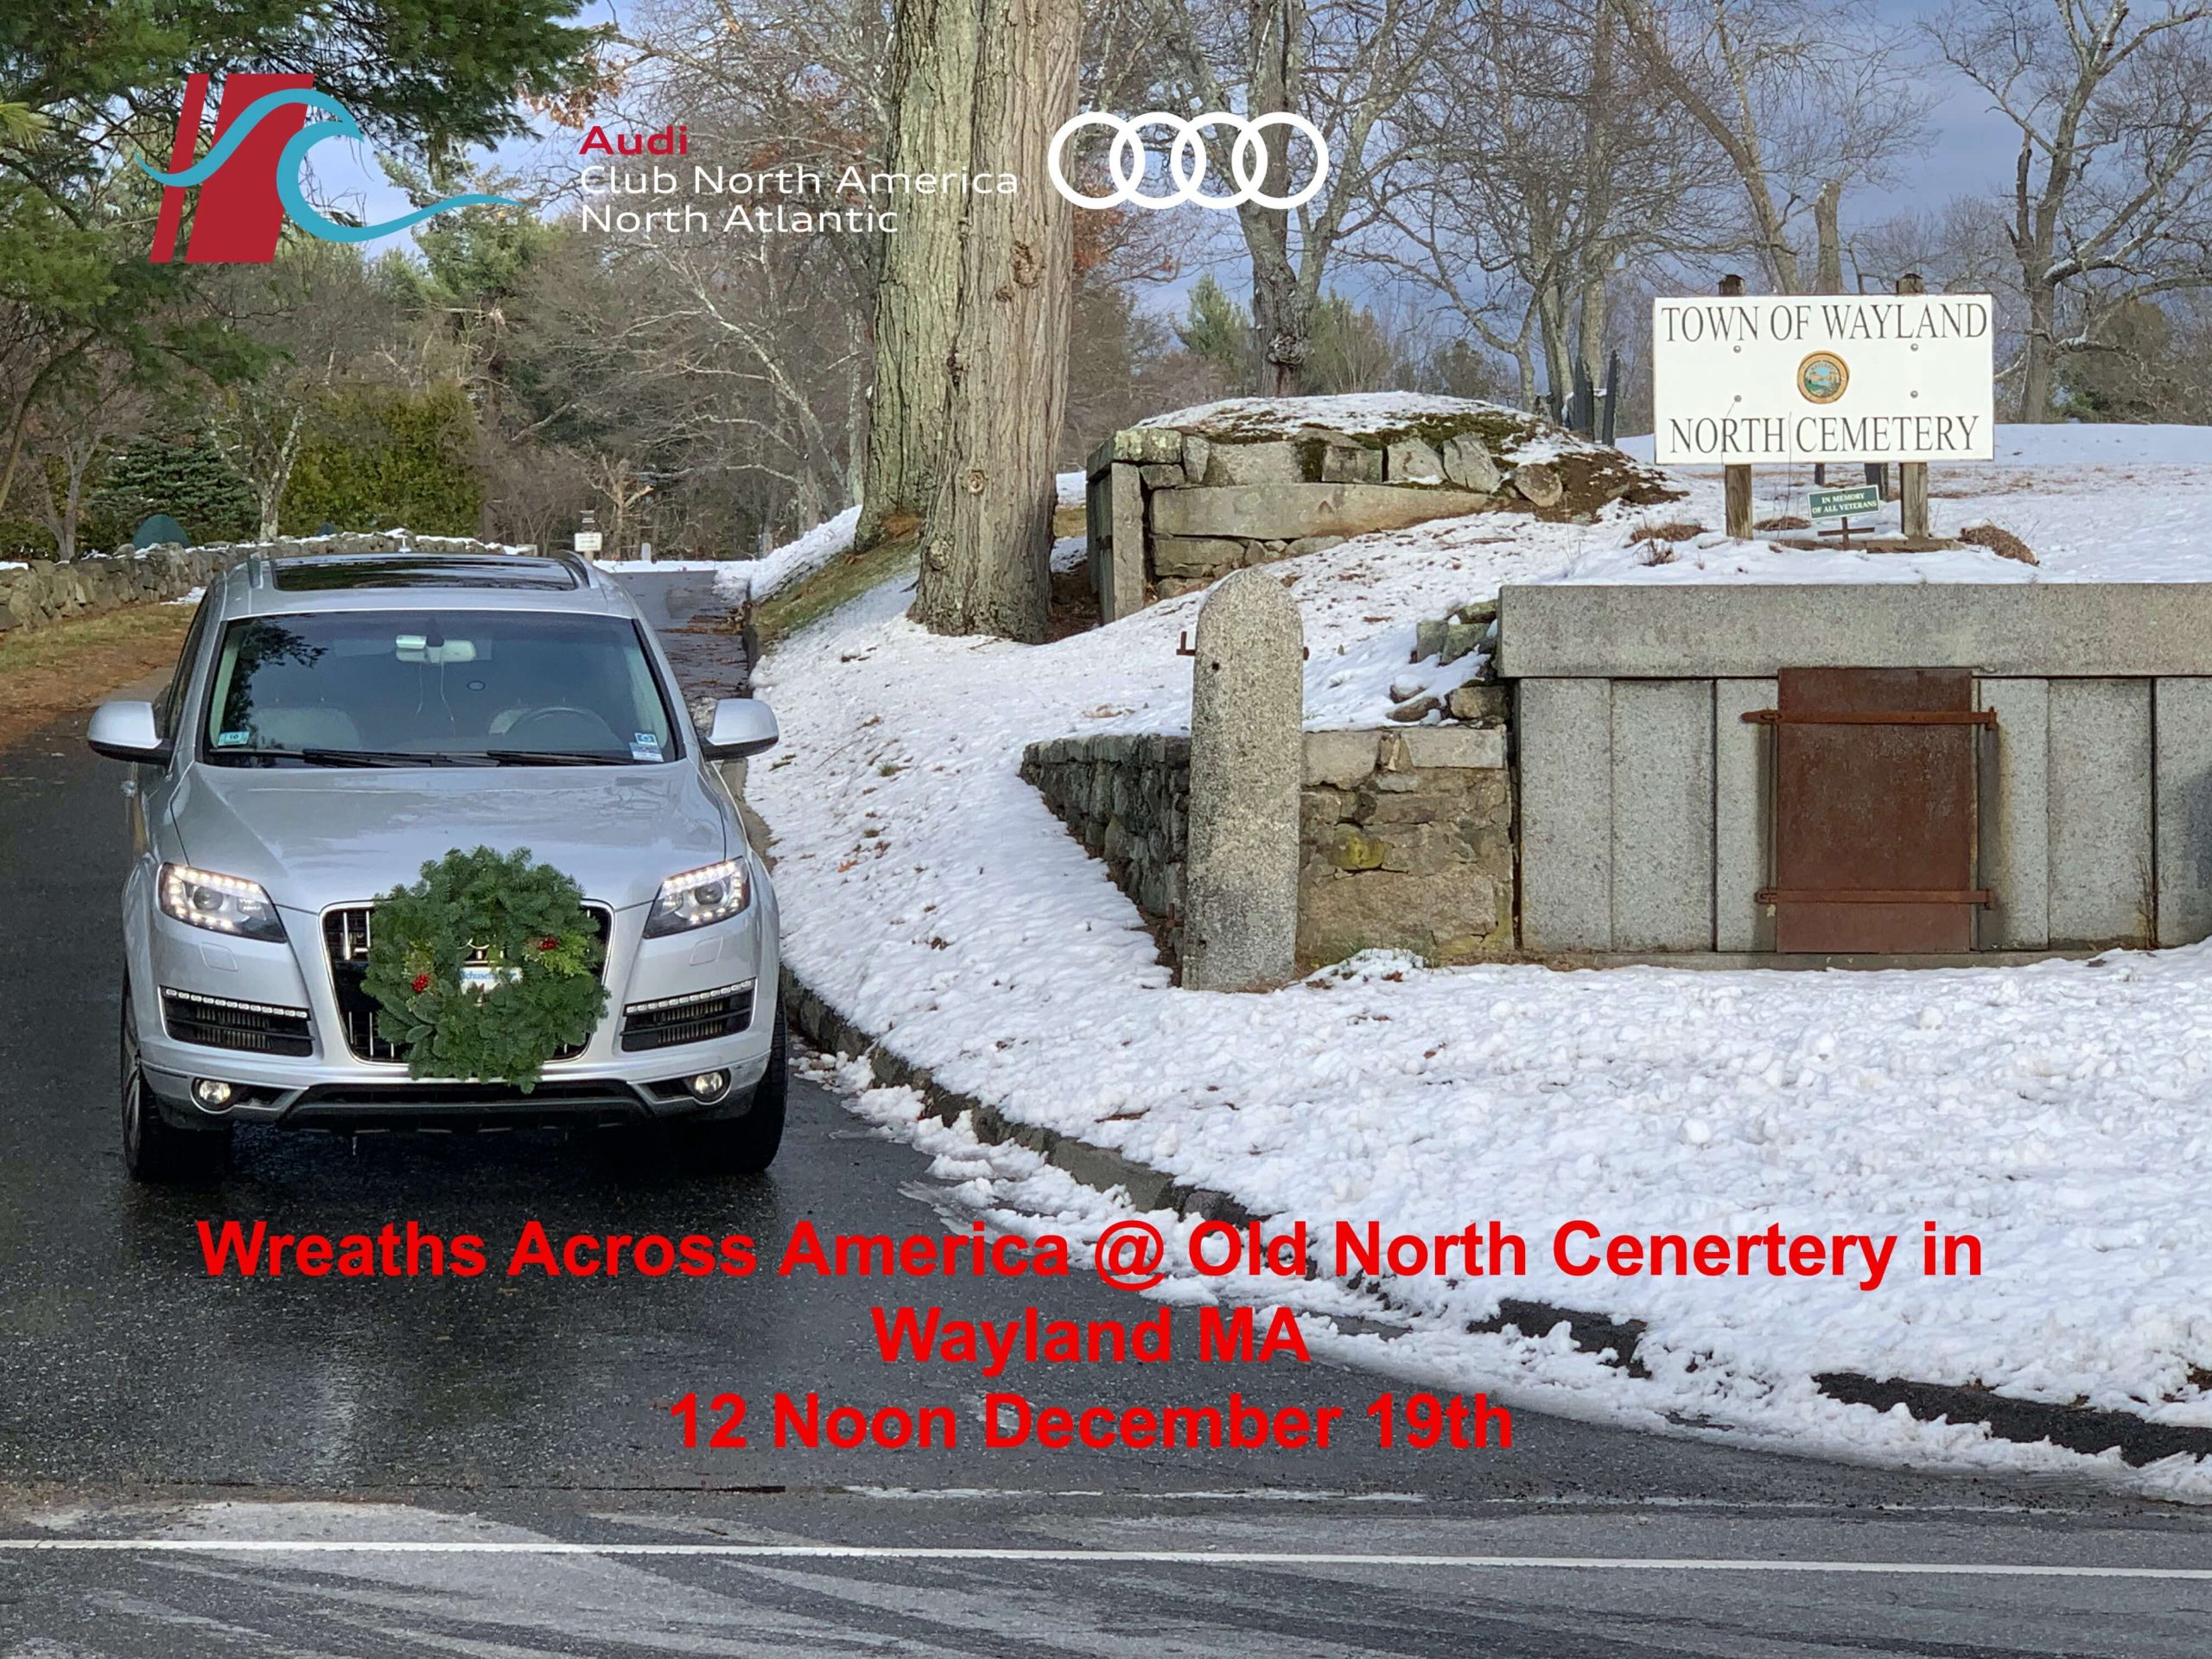 Wreaths Across America - Old North Cemetery